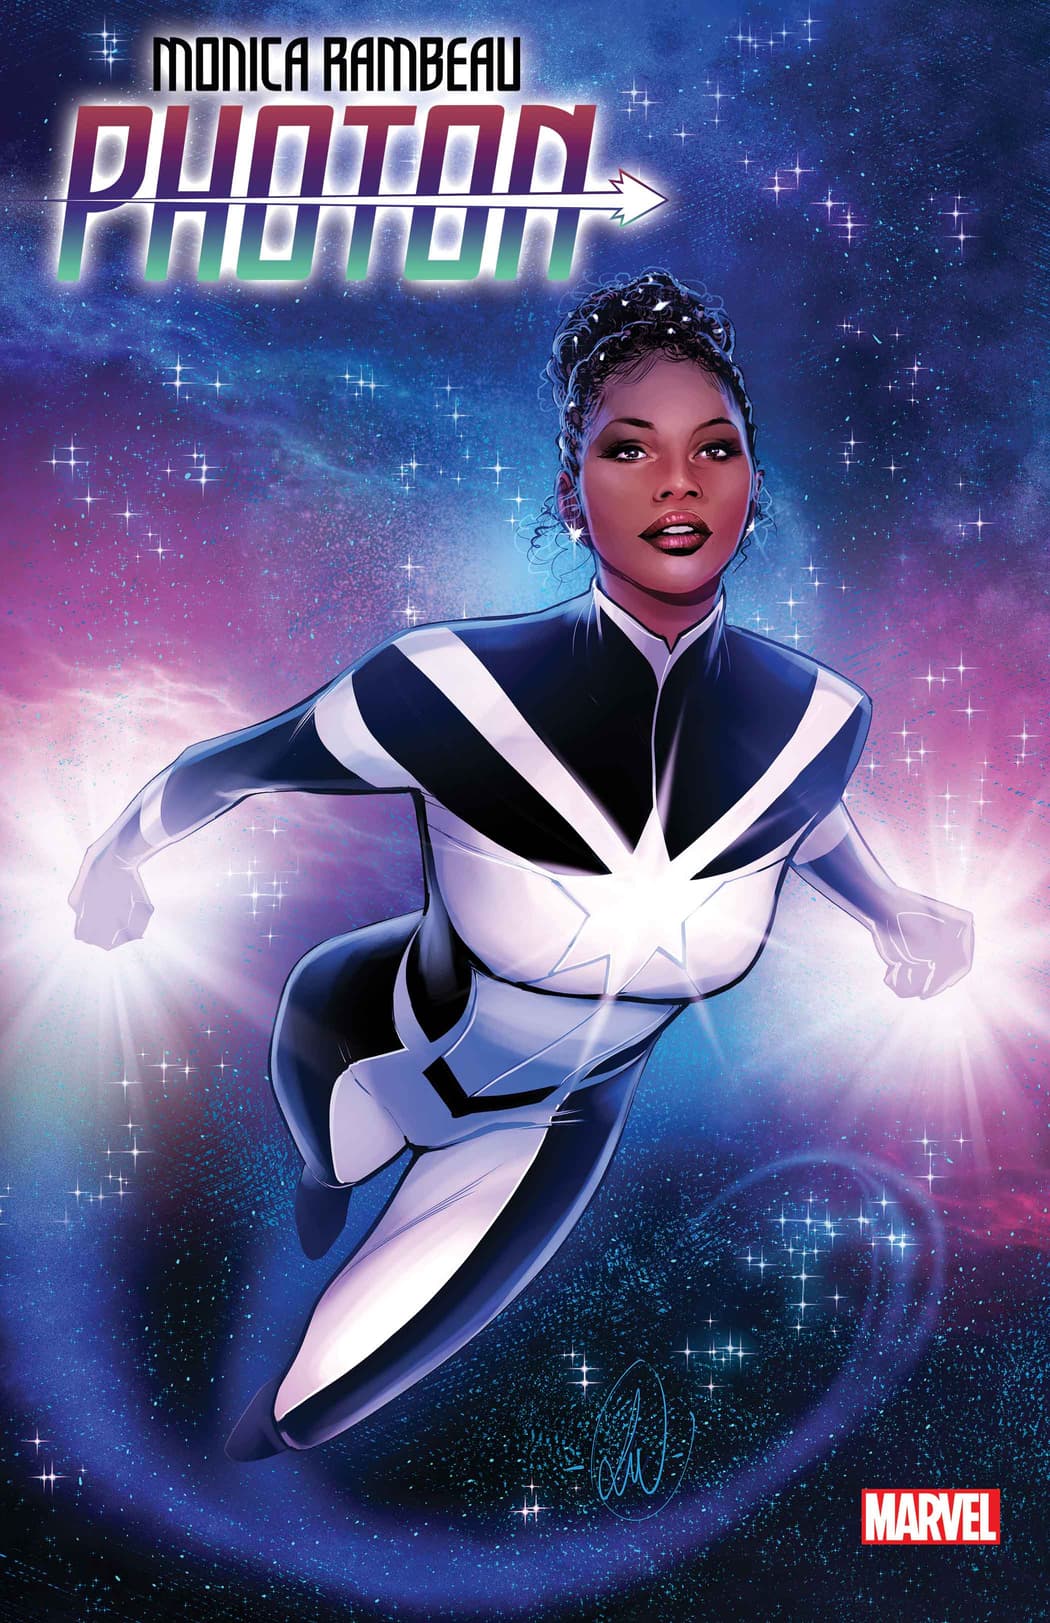 MONICA RAMBEAU: PHOTON #1 cover by Lucas Werneck